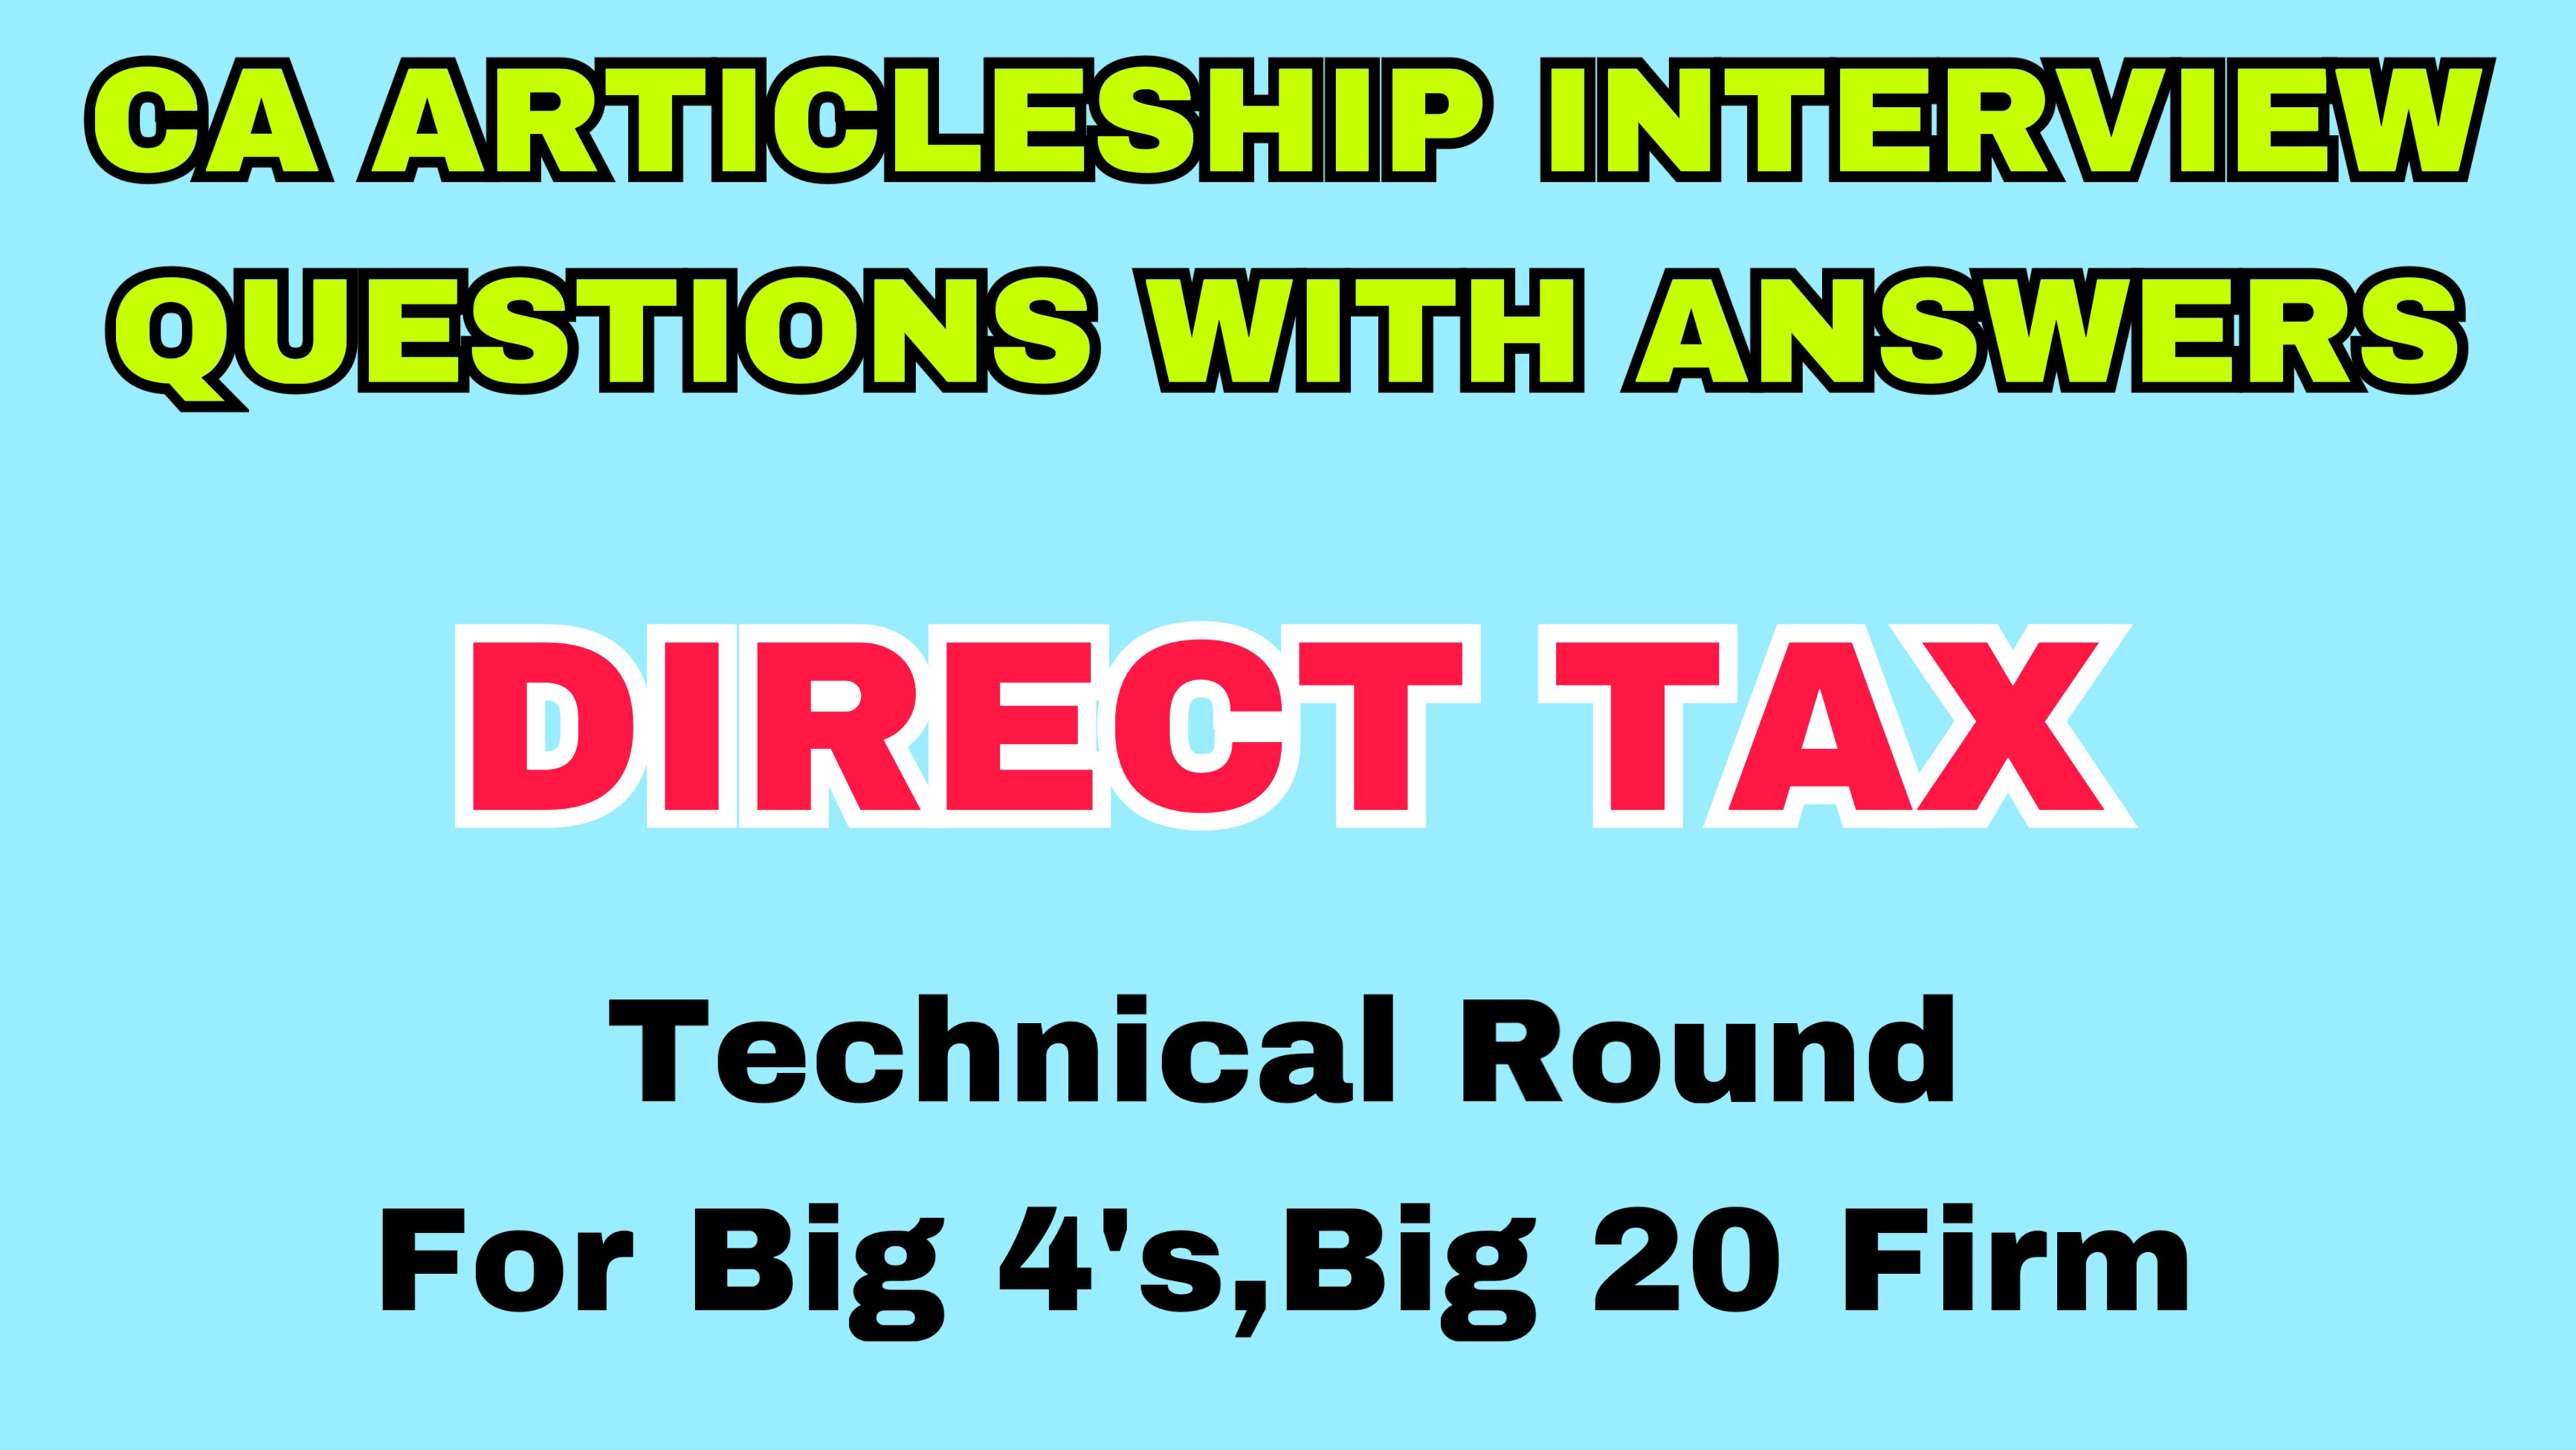 ca-articleship-direct-tax-interview-question-with-answer-for-big-4-s-and-big-20-firms-mcq-s-test